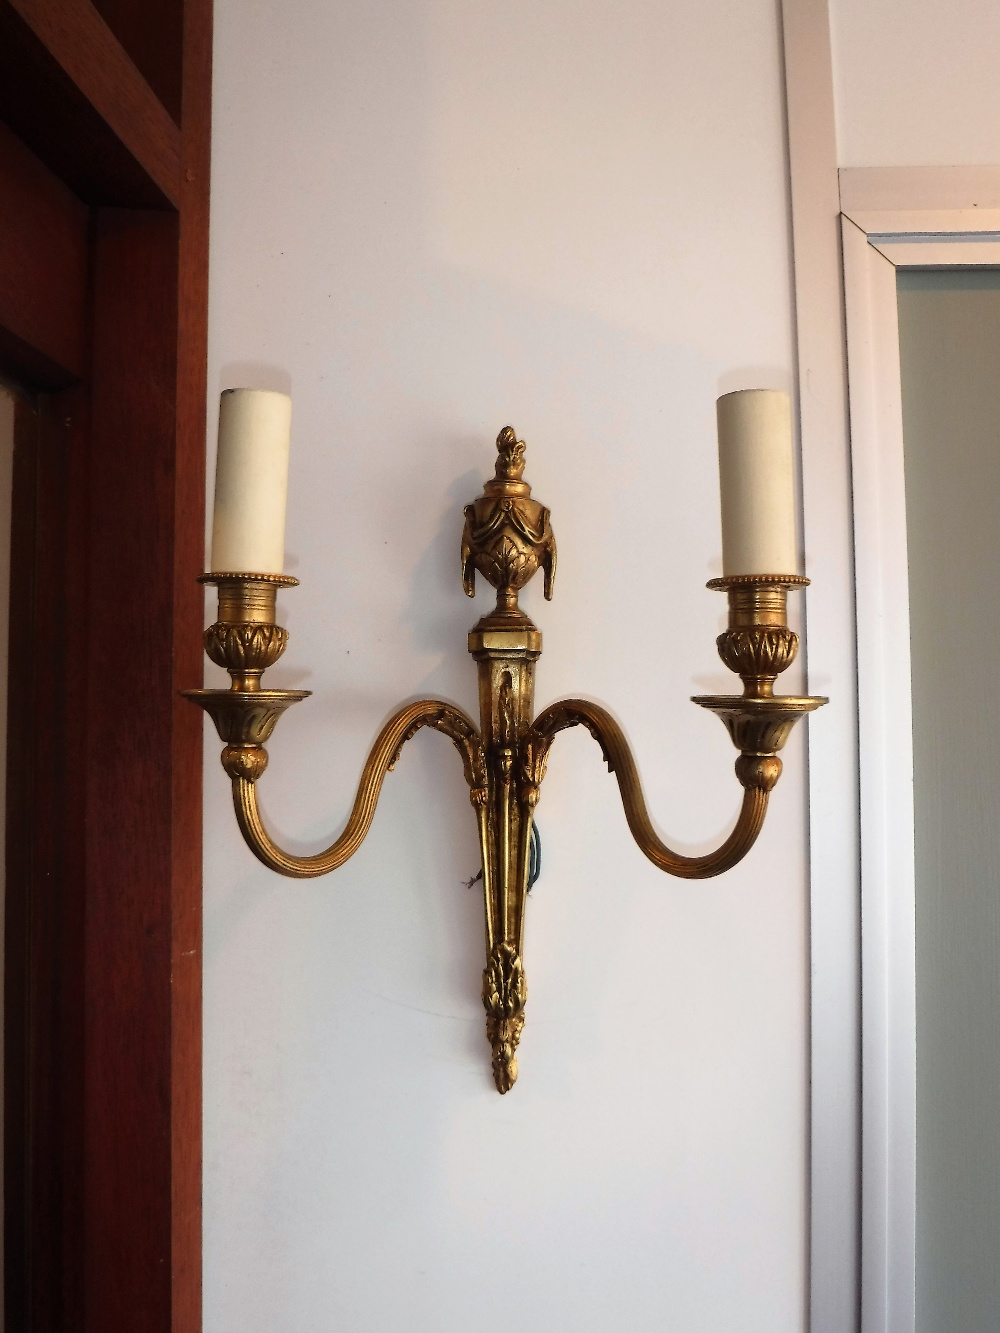 THREE BRASS WALL LIGHTS of Classical form and a similar pair (5) purchased from W Sitch & Co - Image 3 of 3